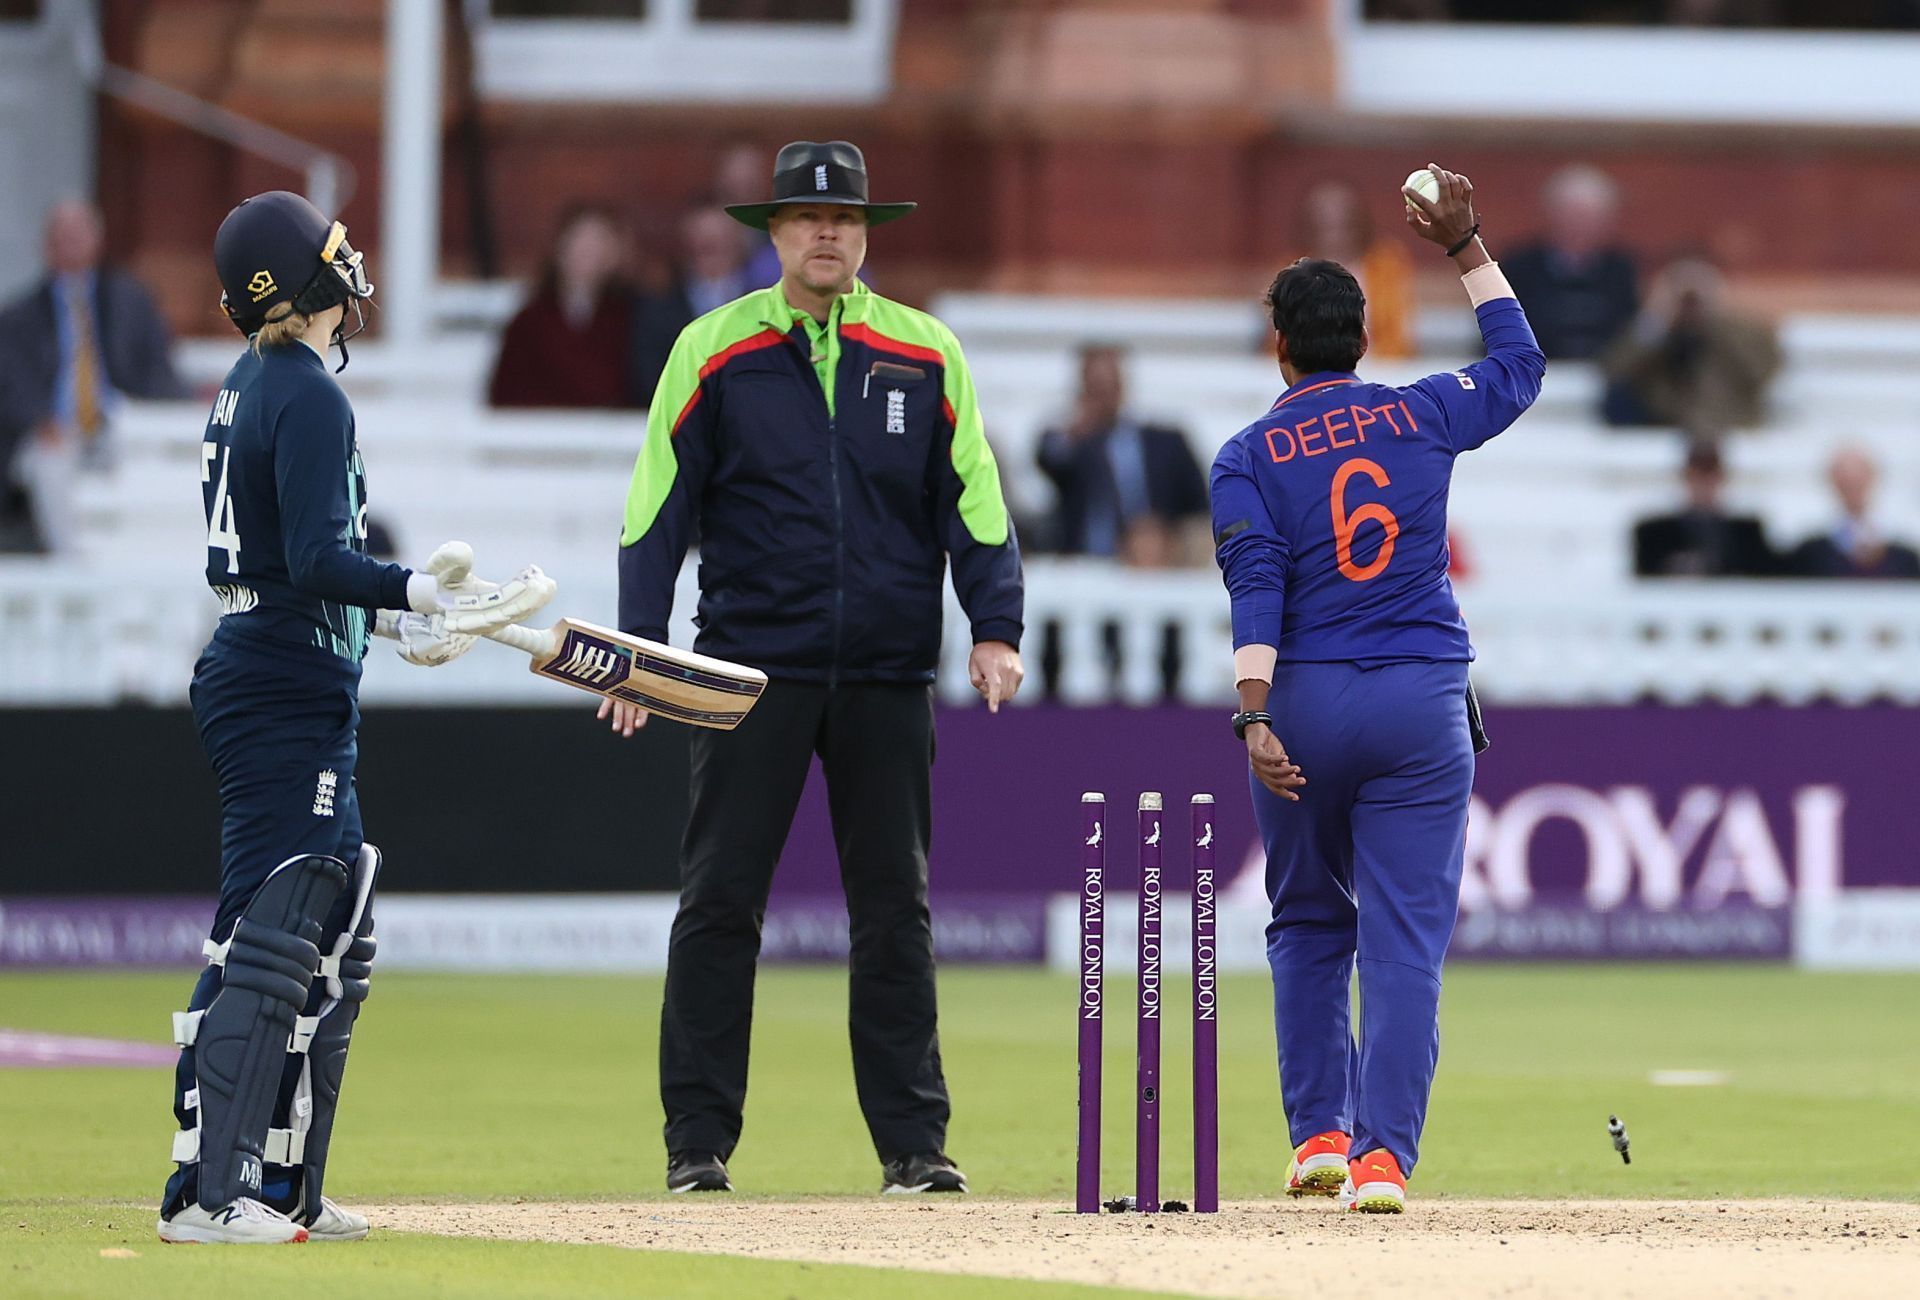 Deepti Sharma claiming the run out of Charlie Dean. Pic: Getty Images